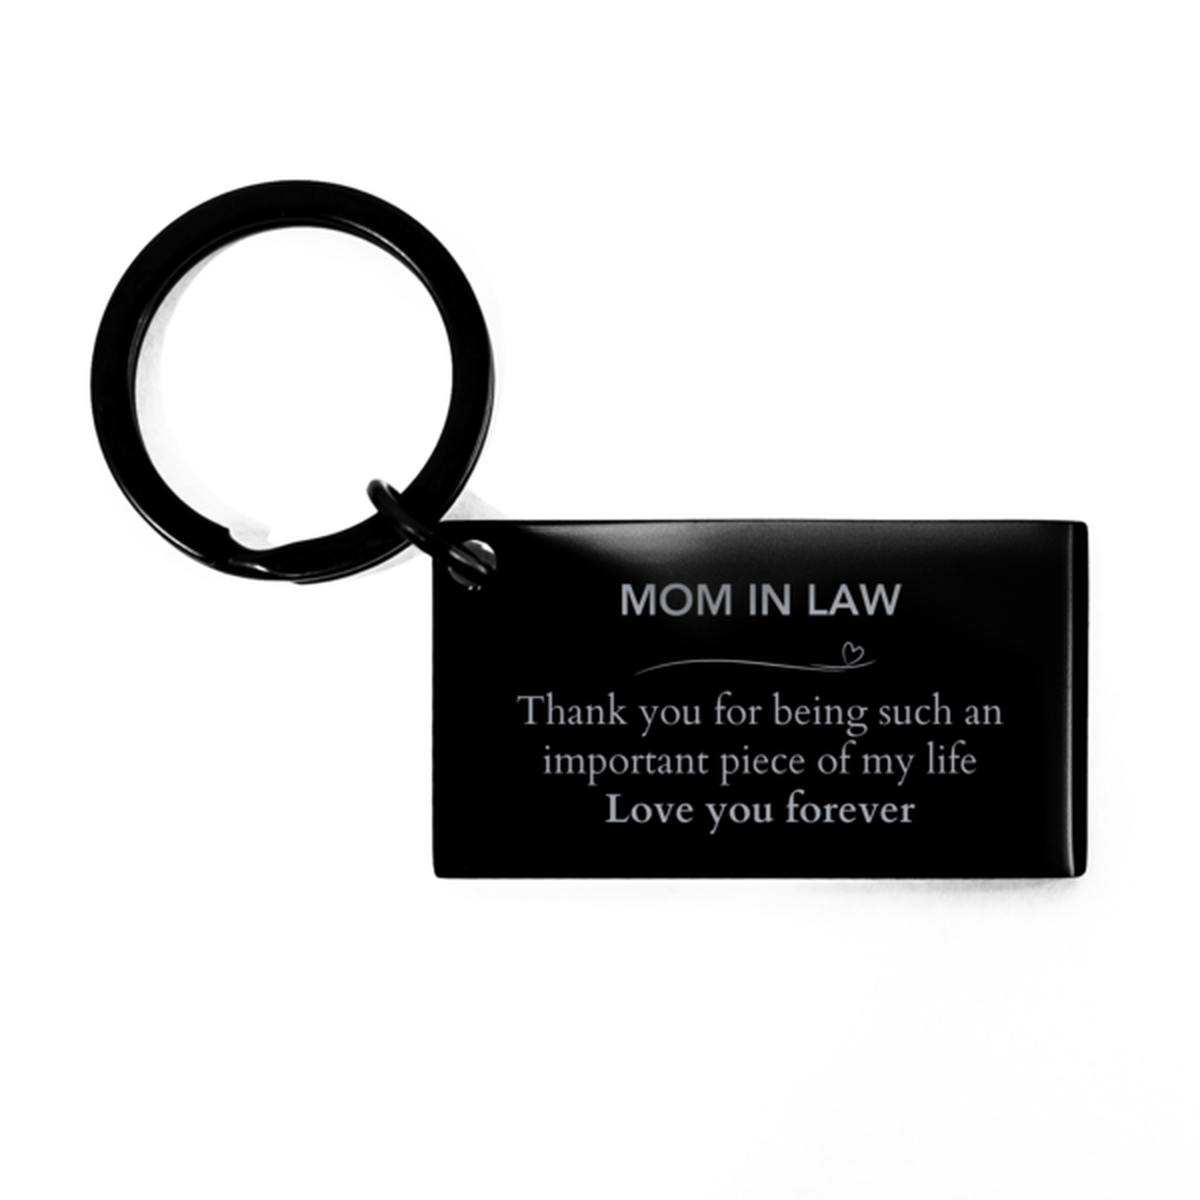 Appropriate Mom In Law Keychain Epic Birthday Gifts for Mom In Law Thank you for being such an important piece of my life Mom In Law Christmas Mothers Fathers Day